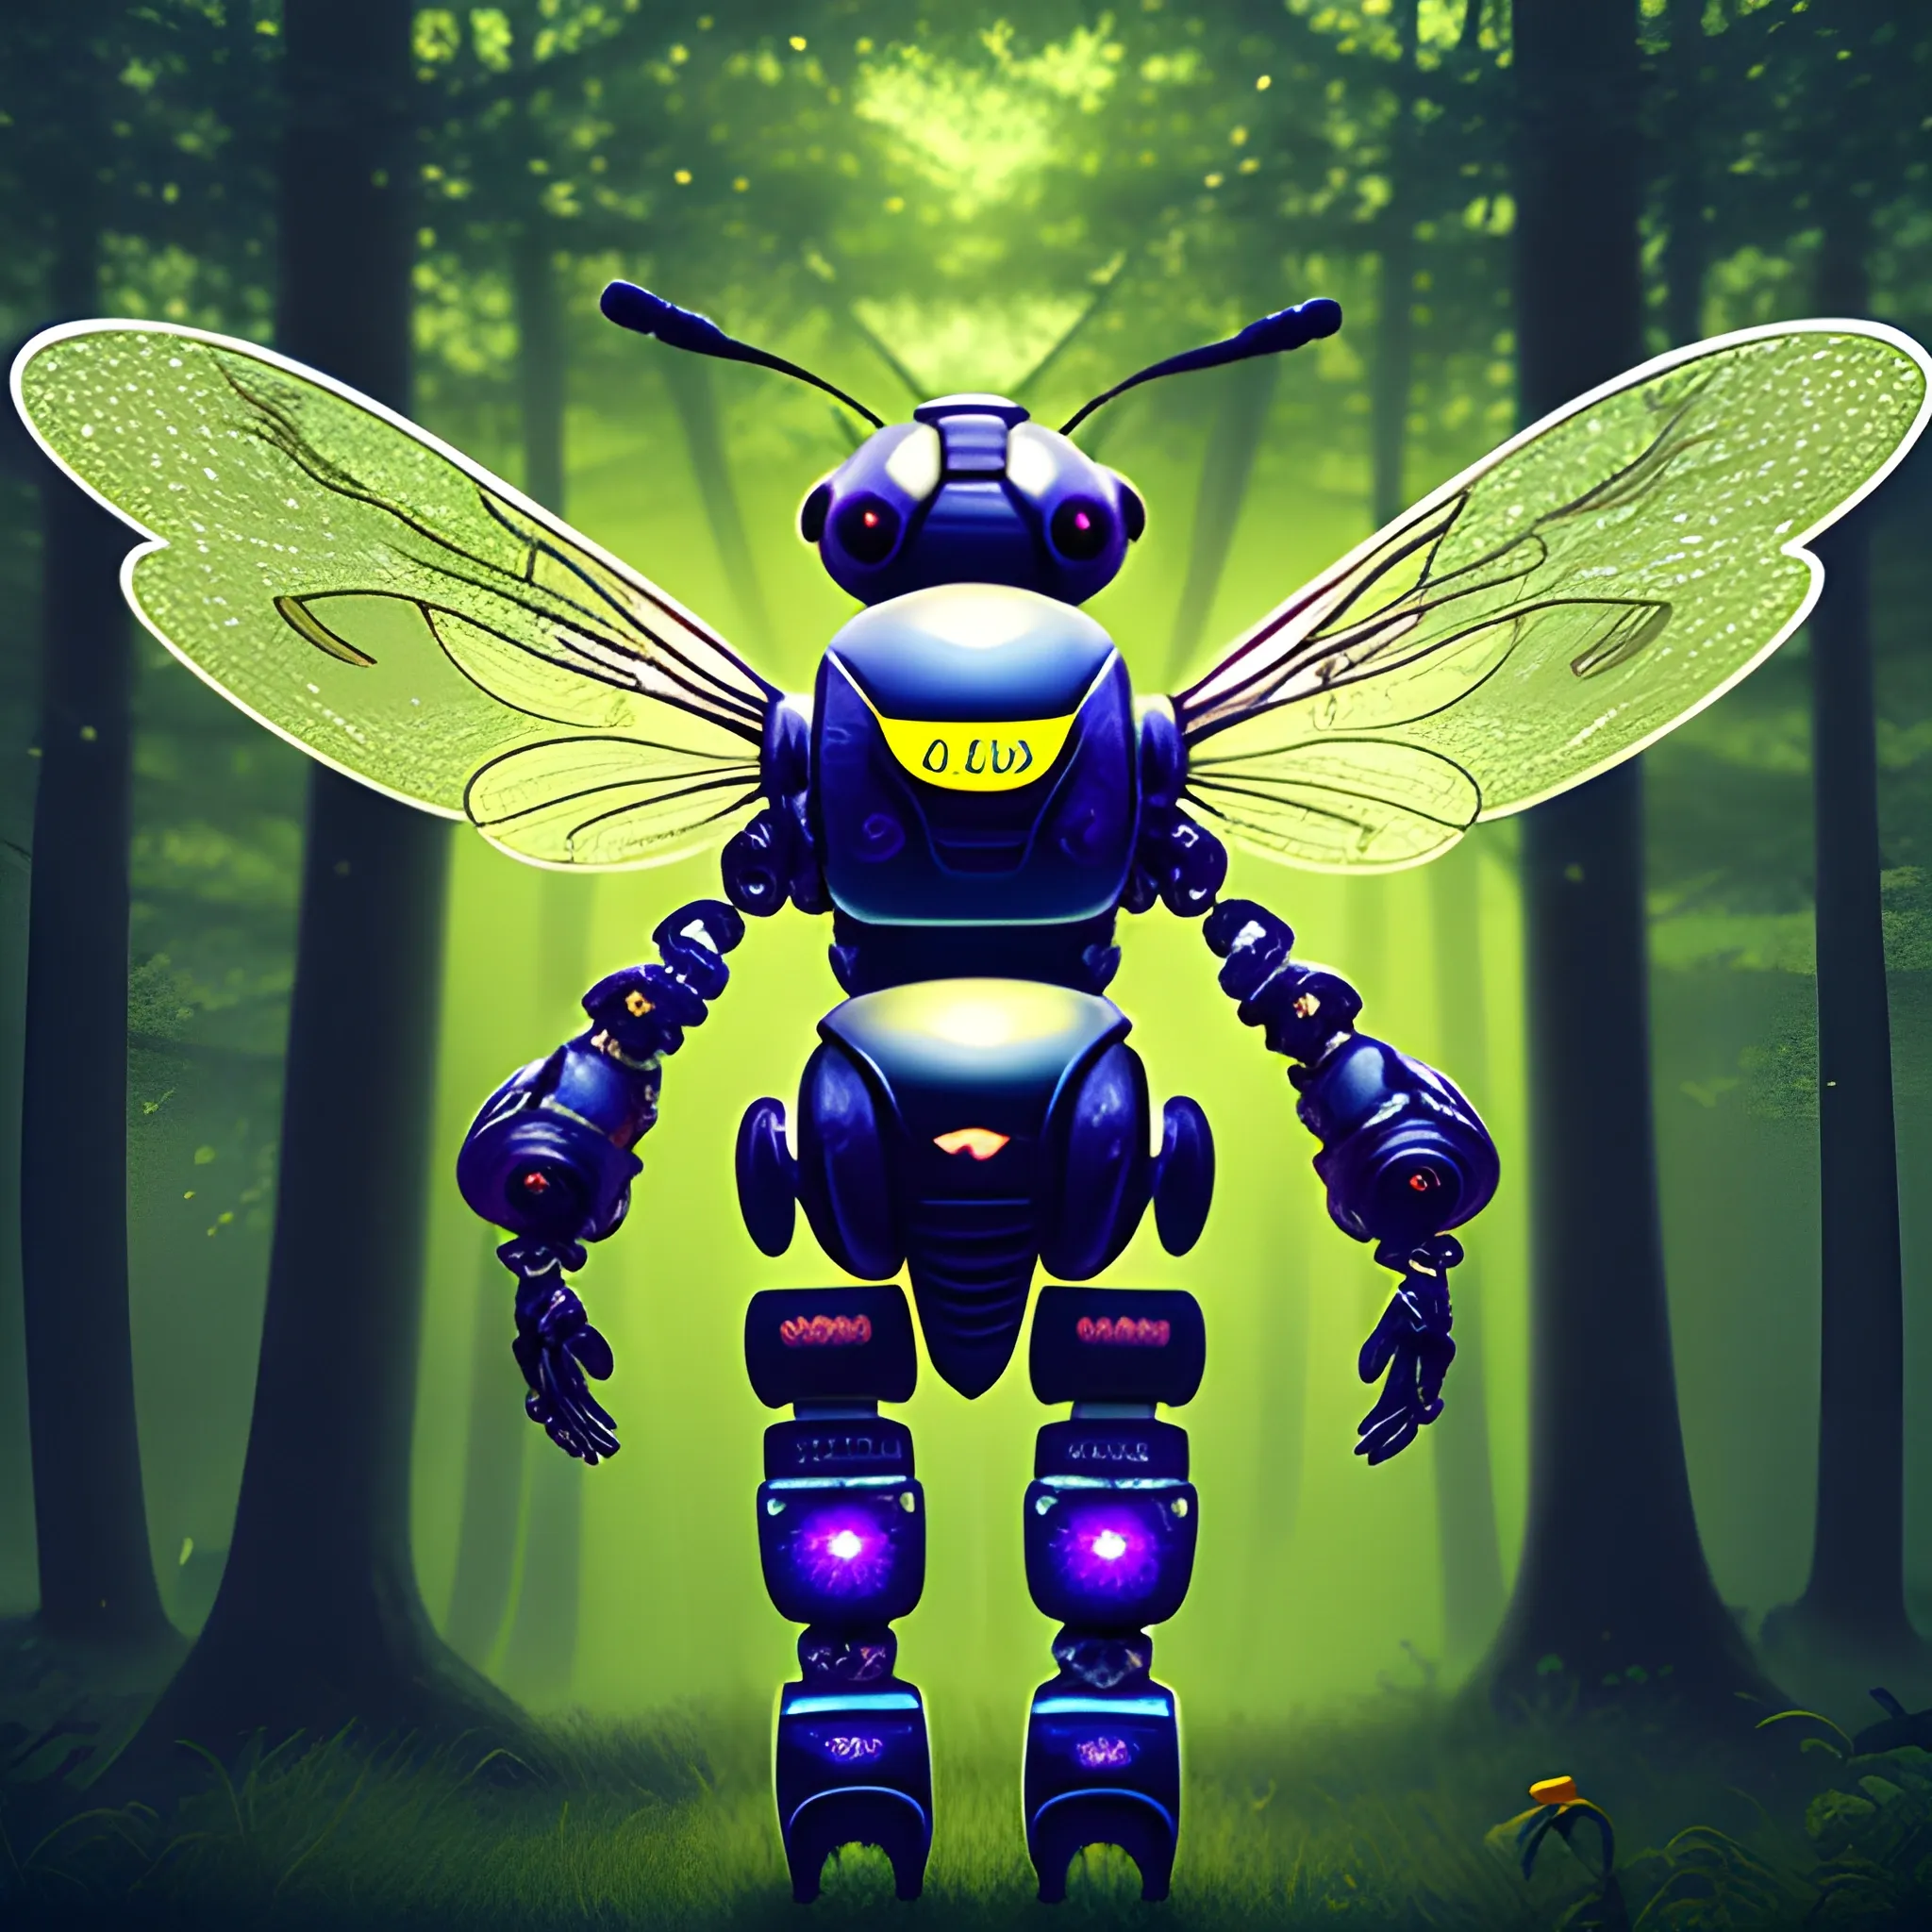 dreamlikeart robot bee, electronic member, view from rear, flying in a mystical forest, high details, intricate, complex world